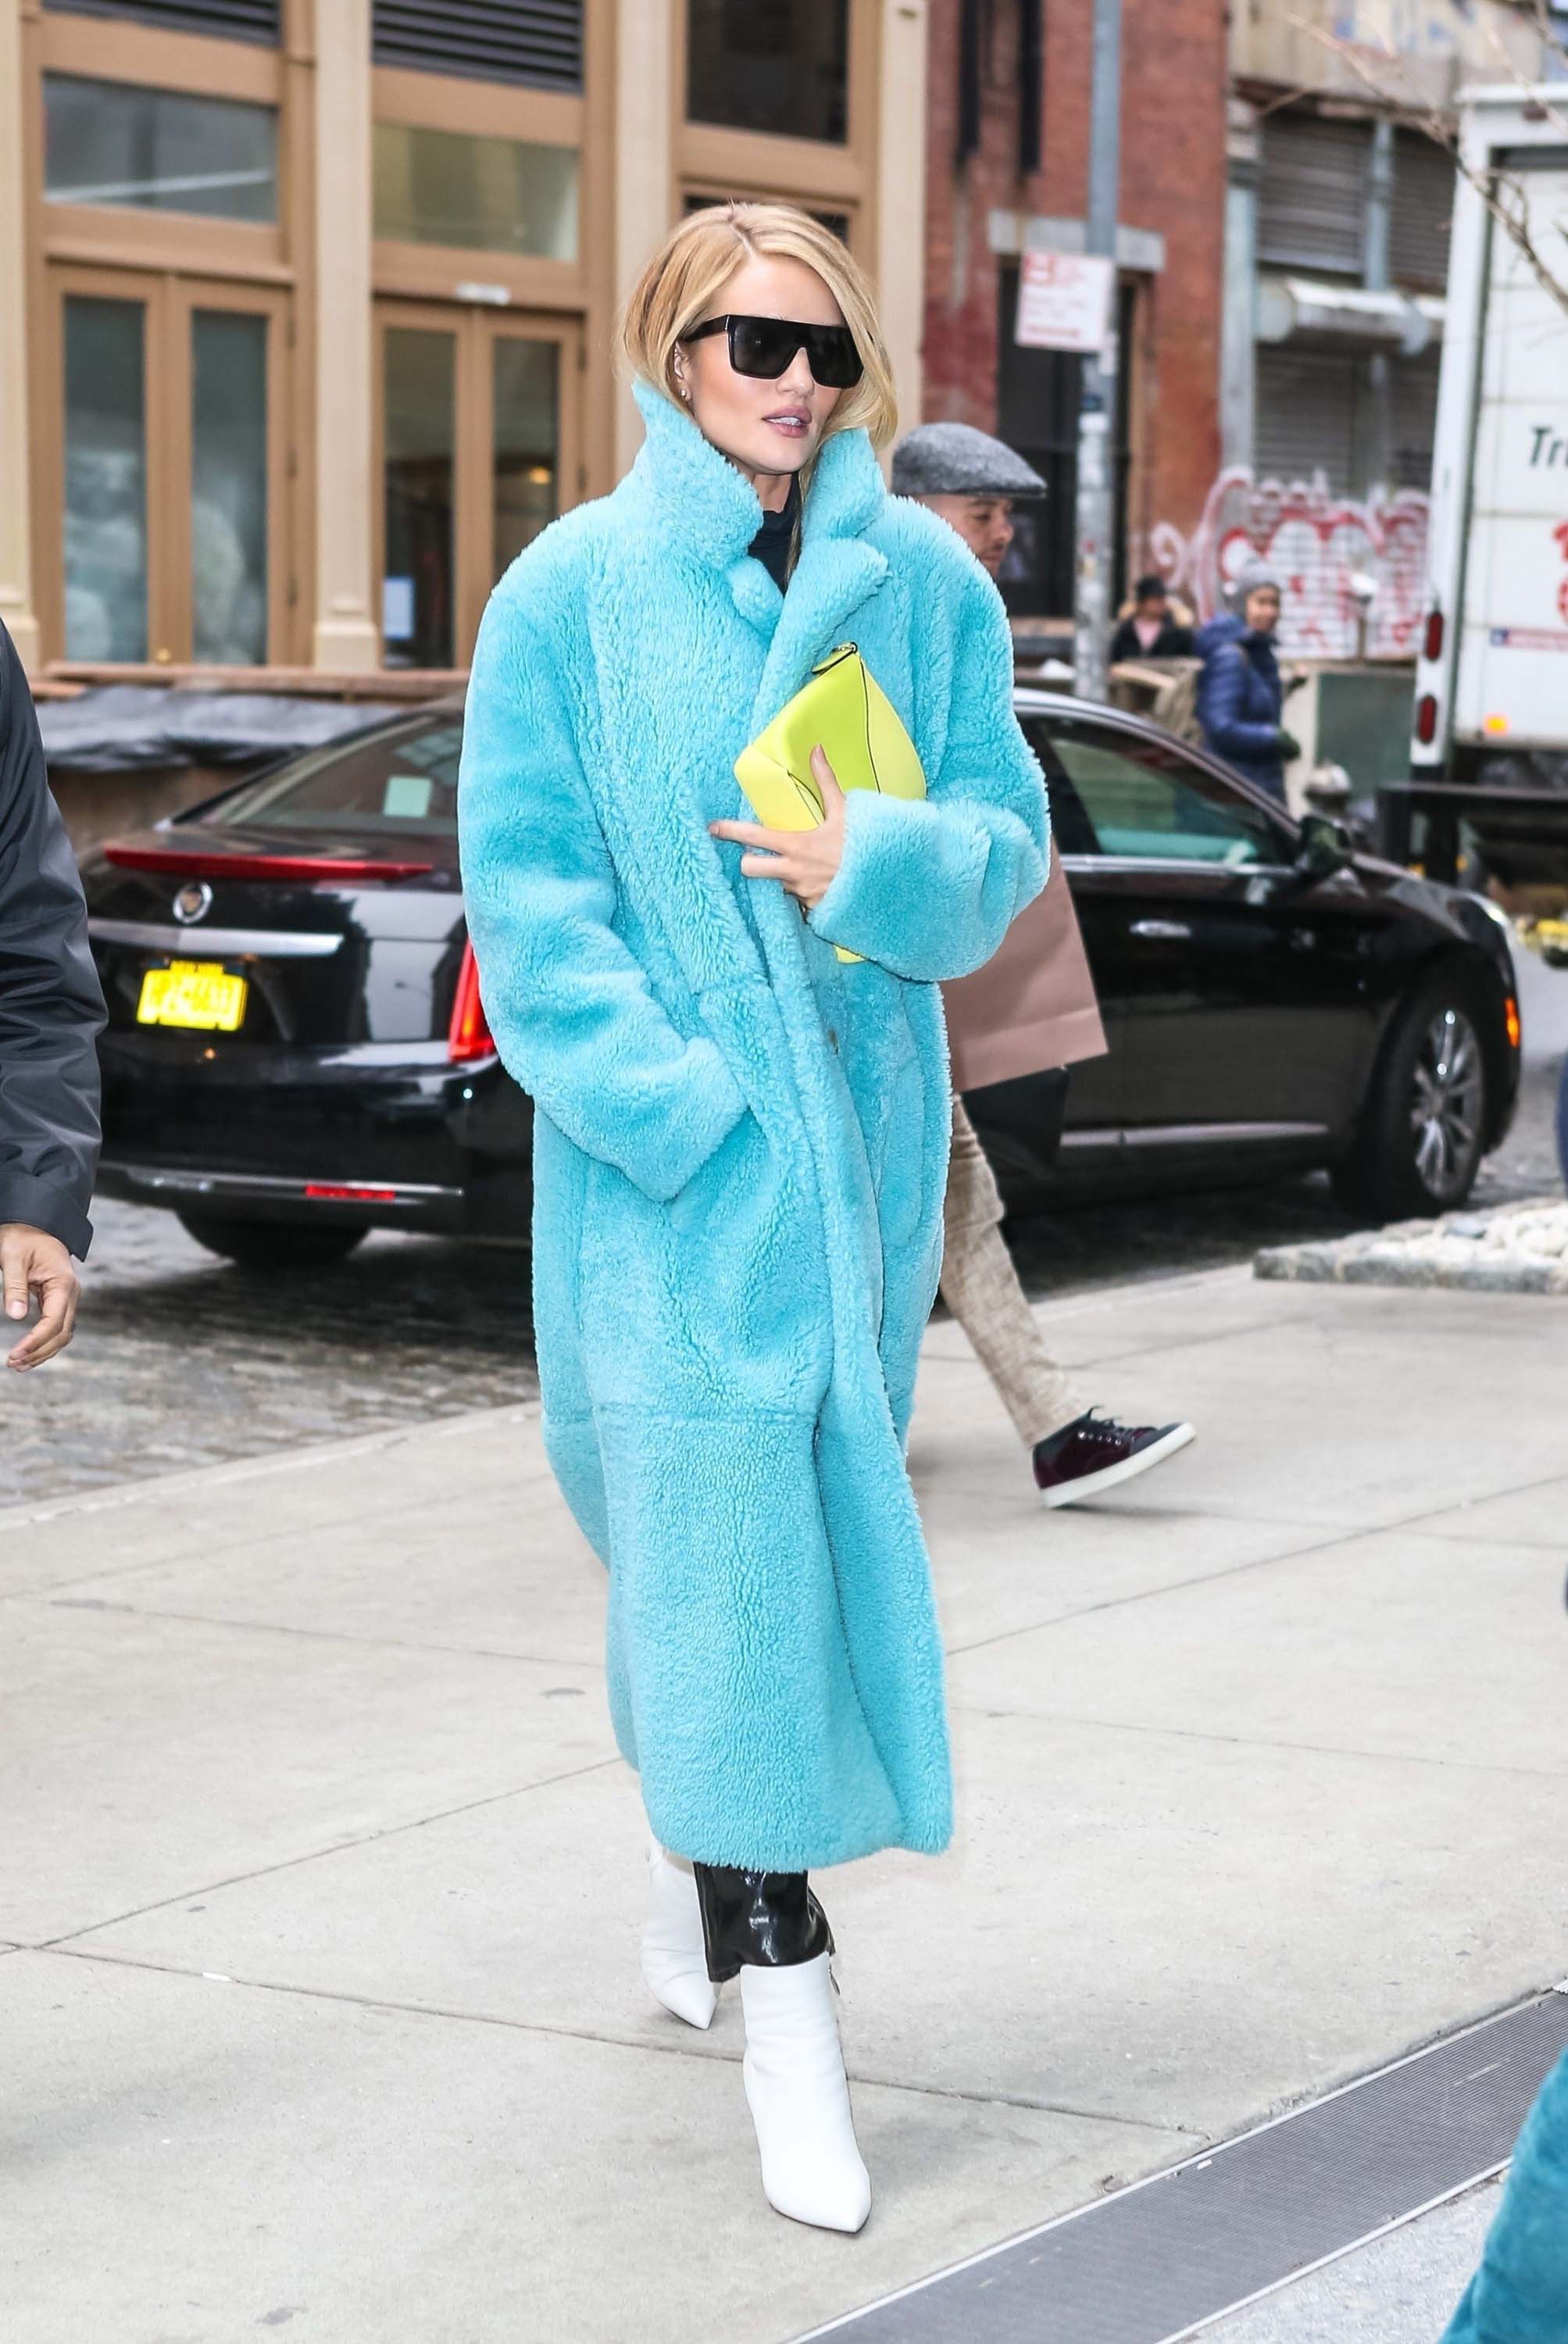 Rosie Huntington Whiteley out in New York City